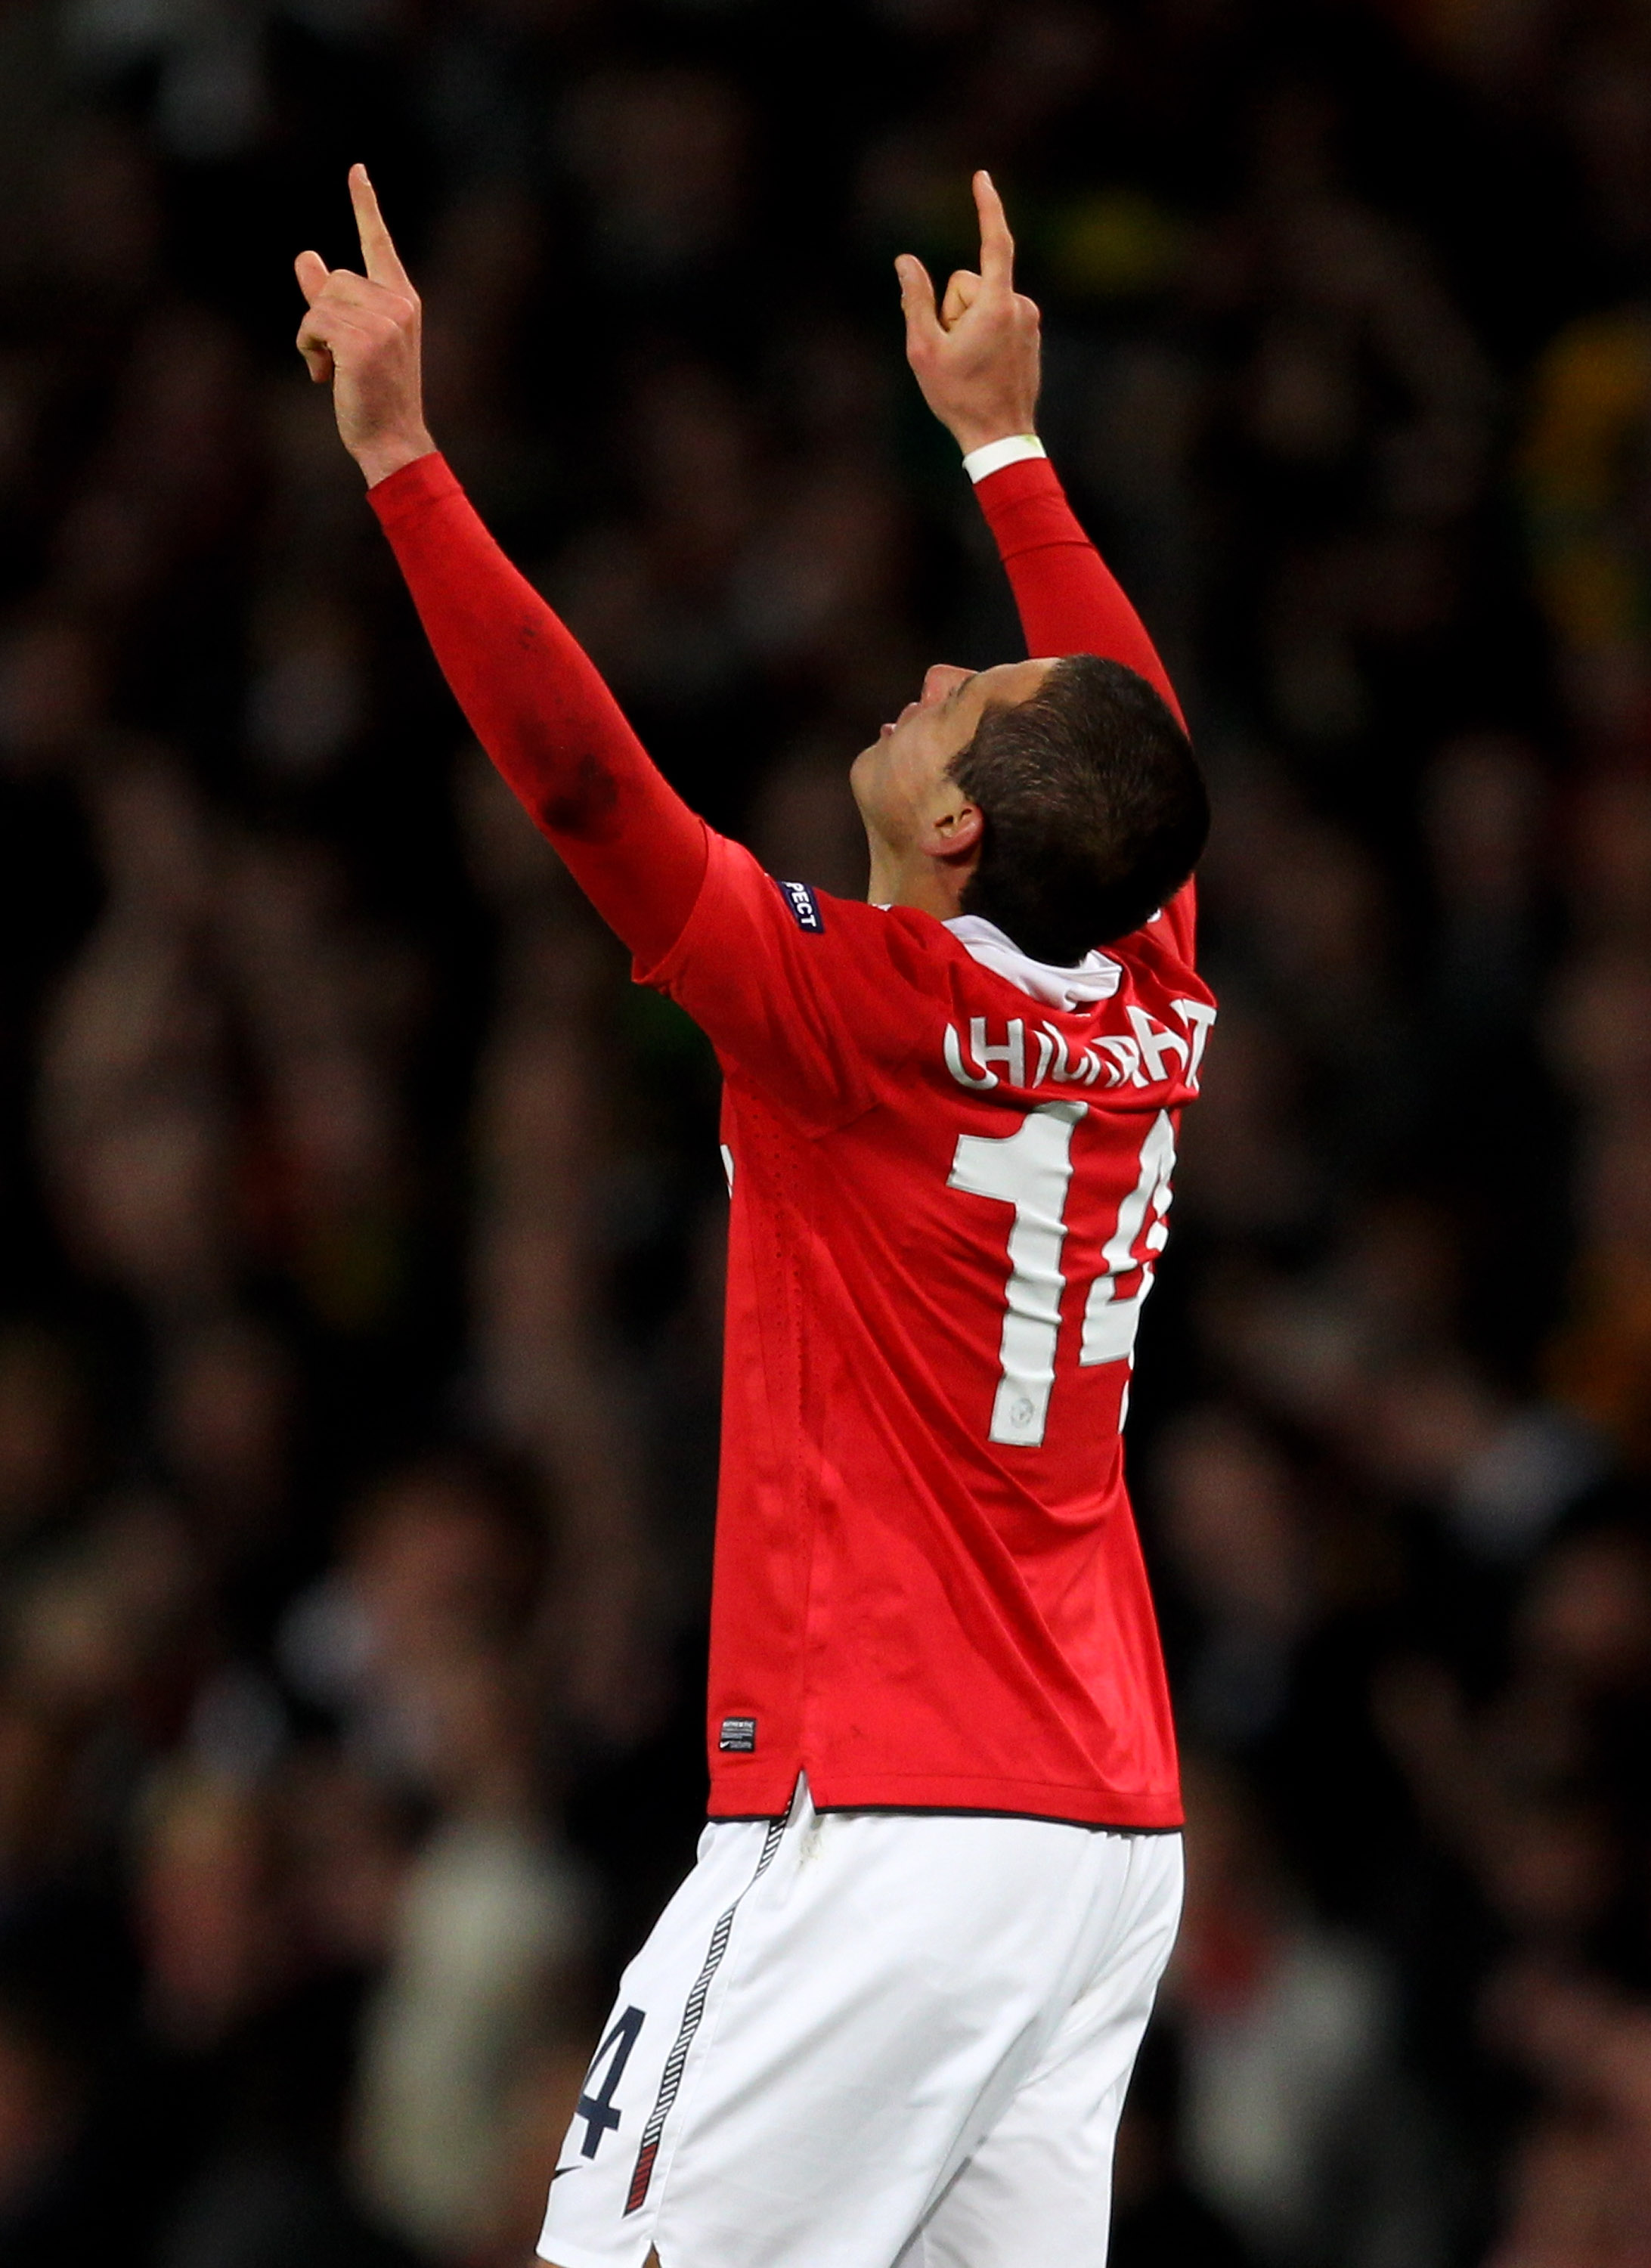 MANCHESTER, ENGLAND - APRIL 12:  Javier Hernandez of Manchester United celebrates scoring the opening goal during the UEFA Champions League Quarter Final second leg match between Manchester United and Chelsea at Old Trafford on April 12, 2011 in Mancheste